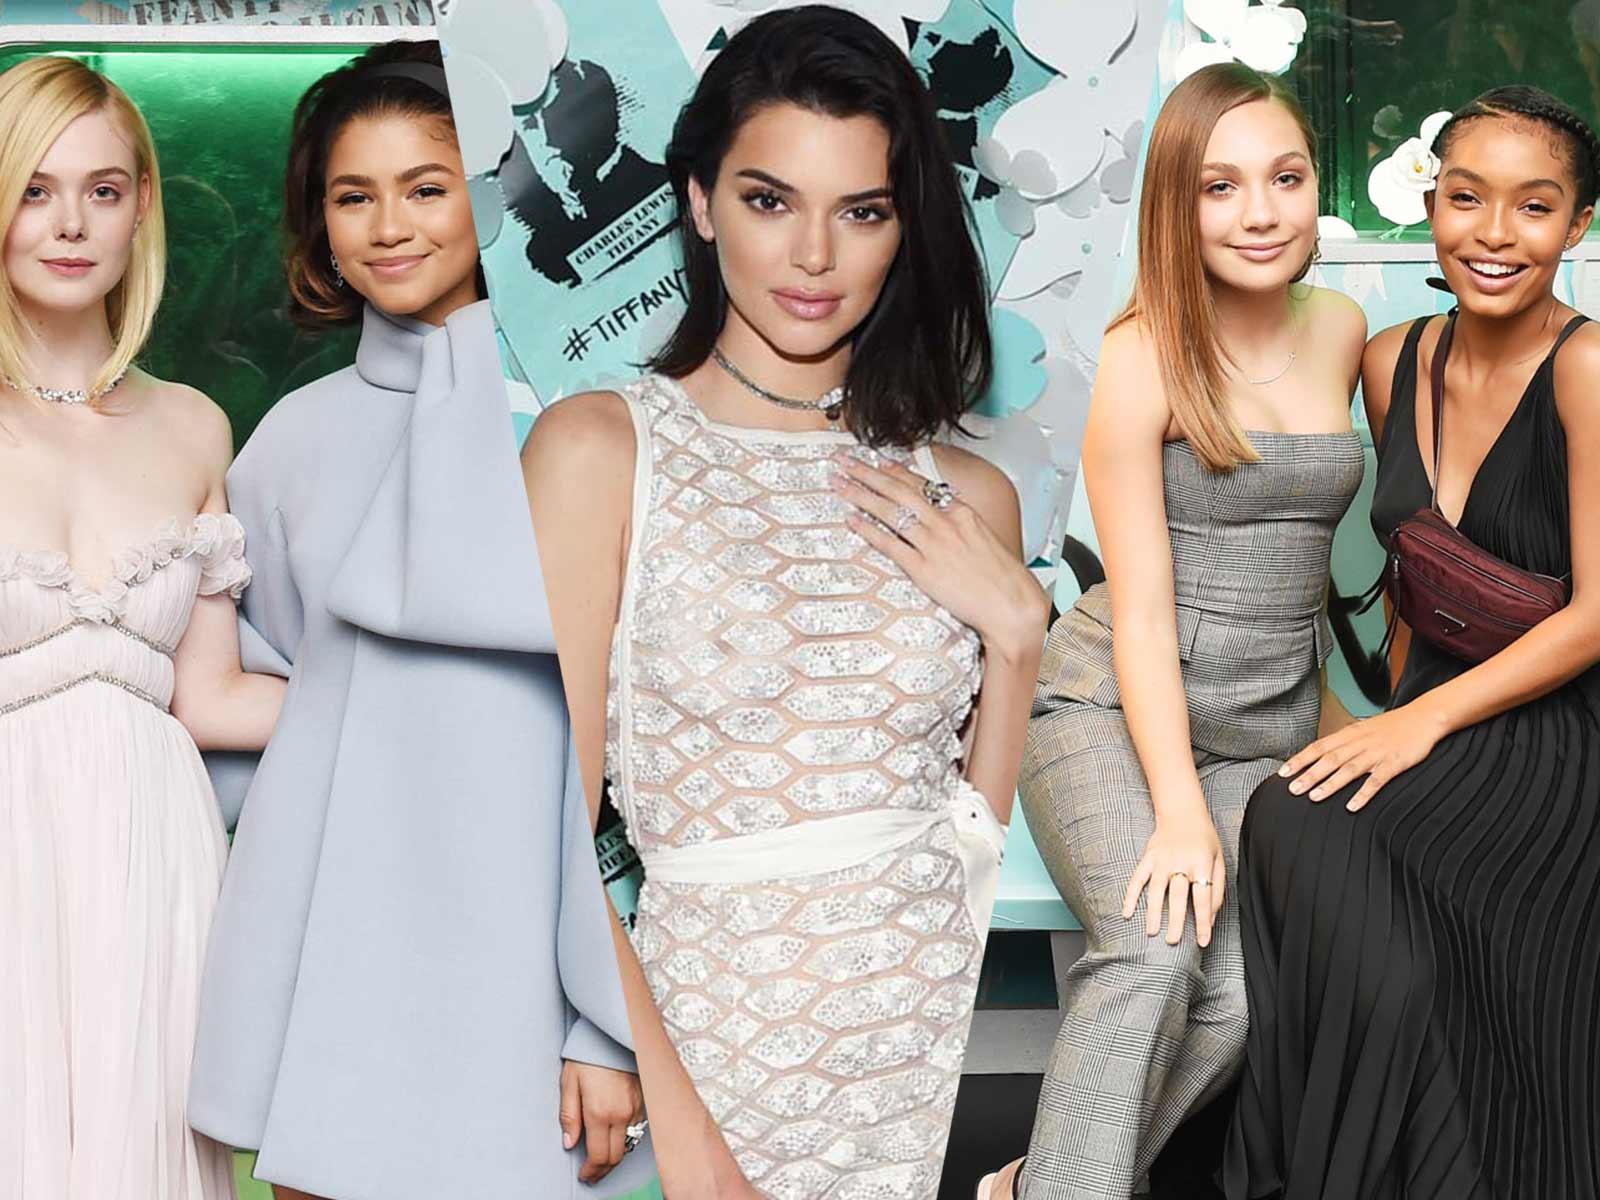 Hailey Baldwin, Zendaya and Elle Fanning Take Over Tiffany & Co. Event With Young Stars